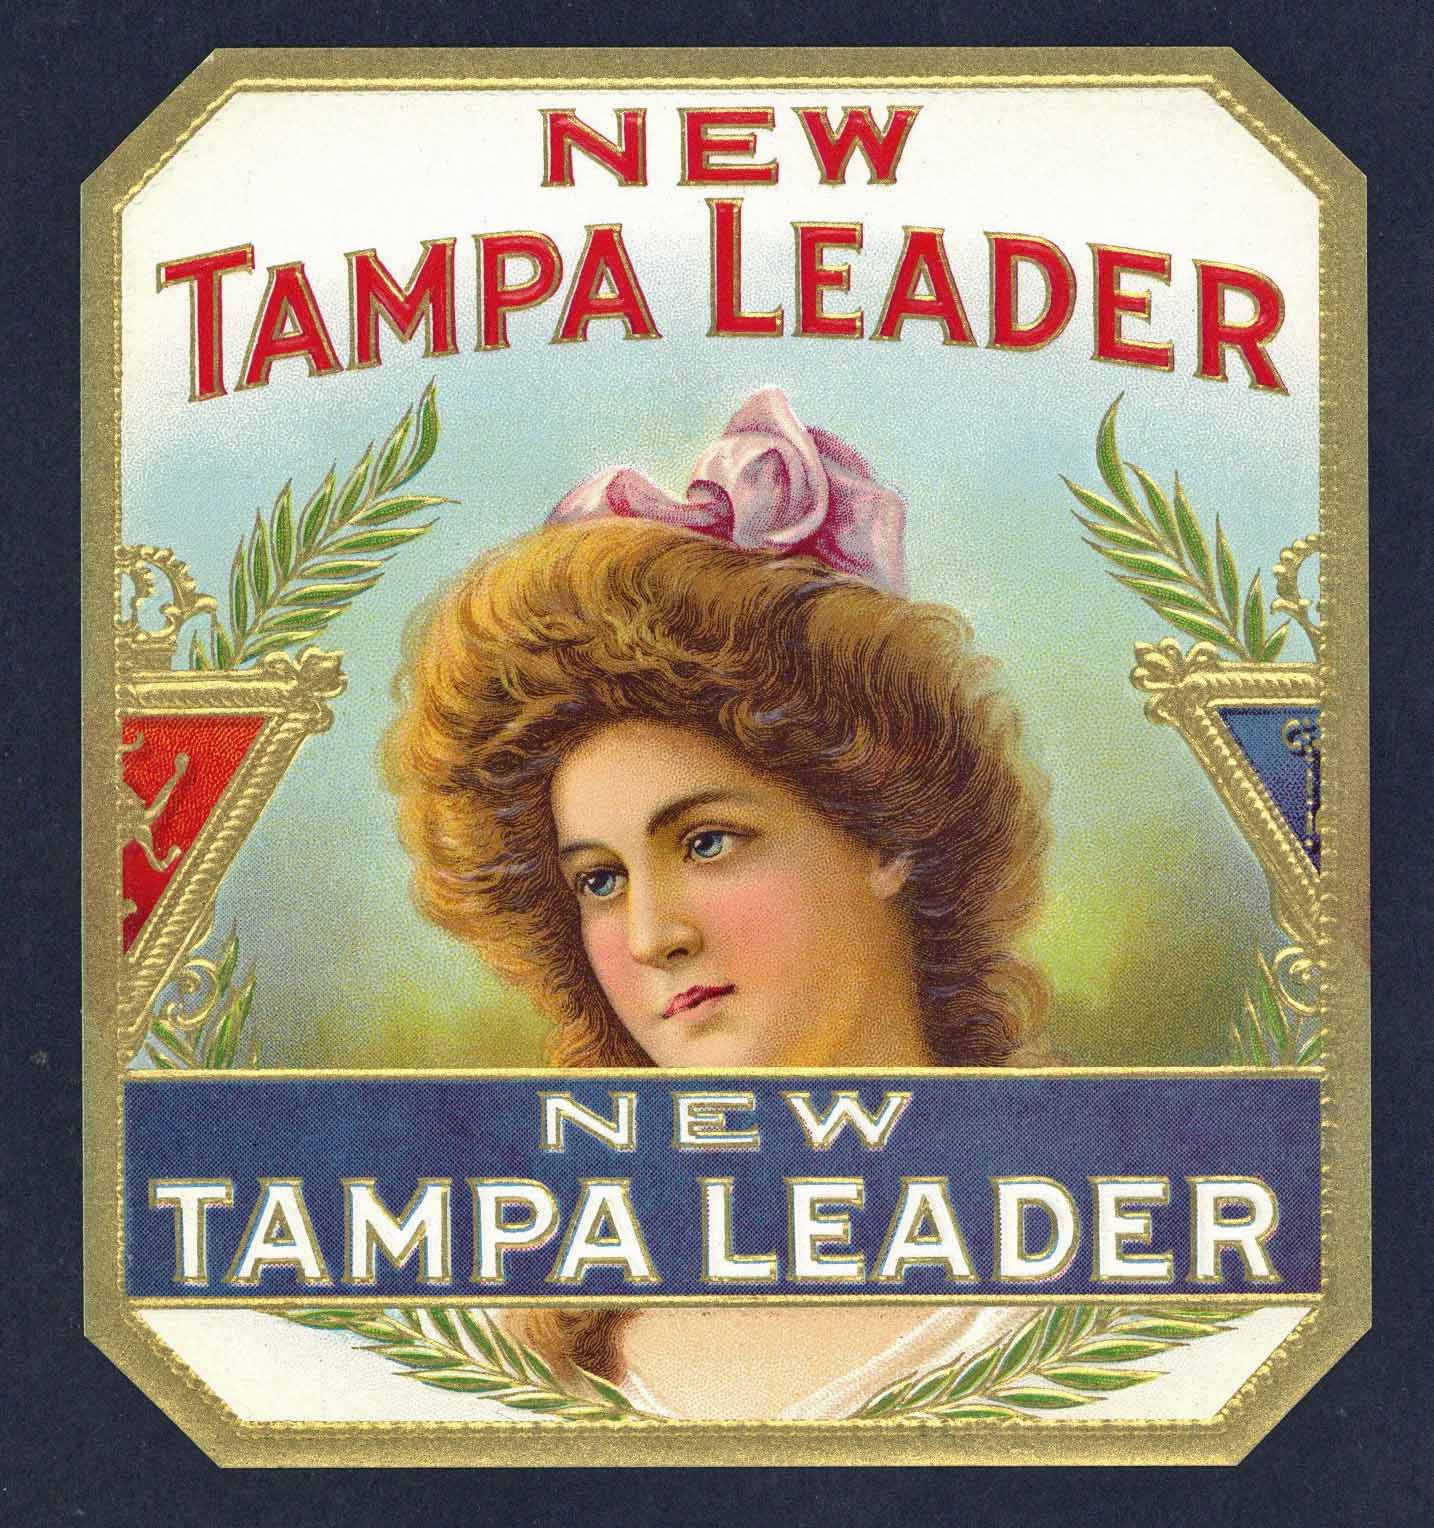 New Tampa Leader Brand outer Cigar Box Label